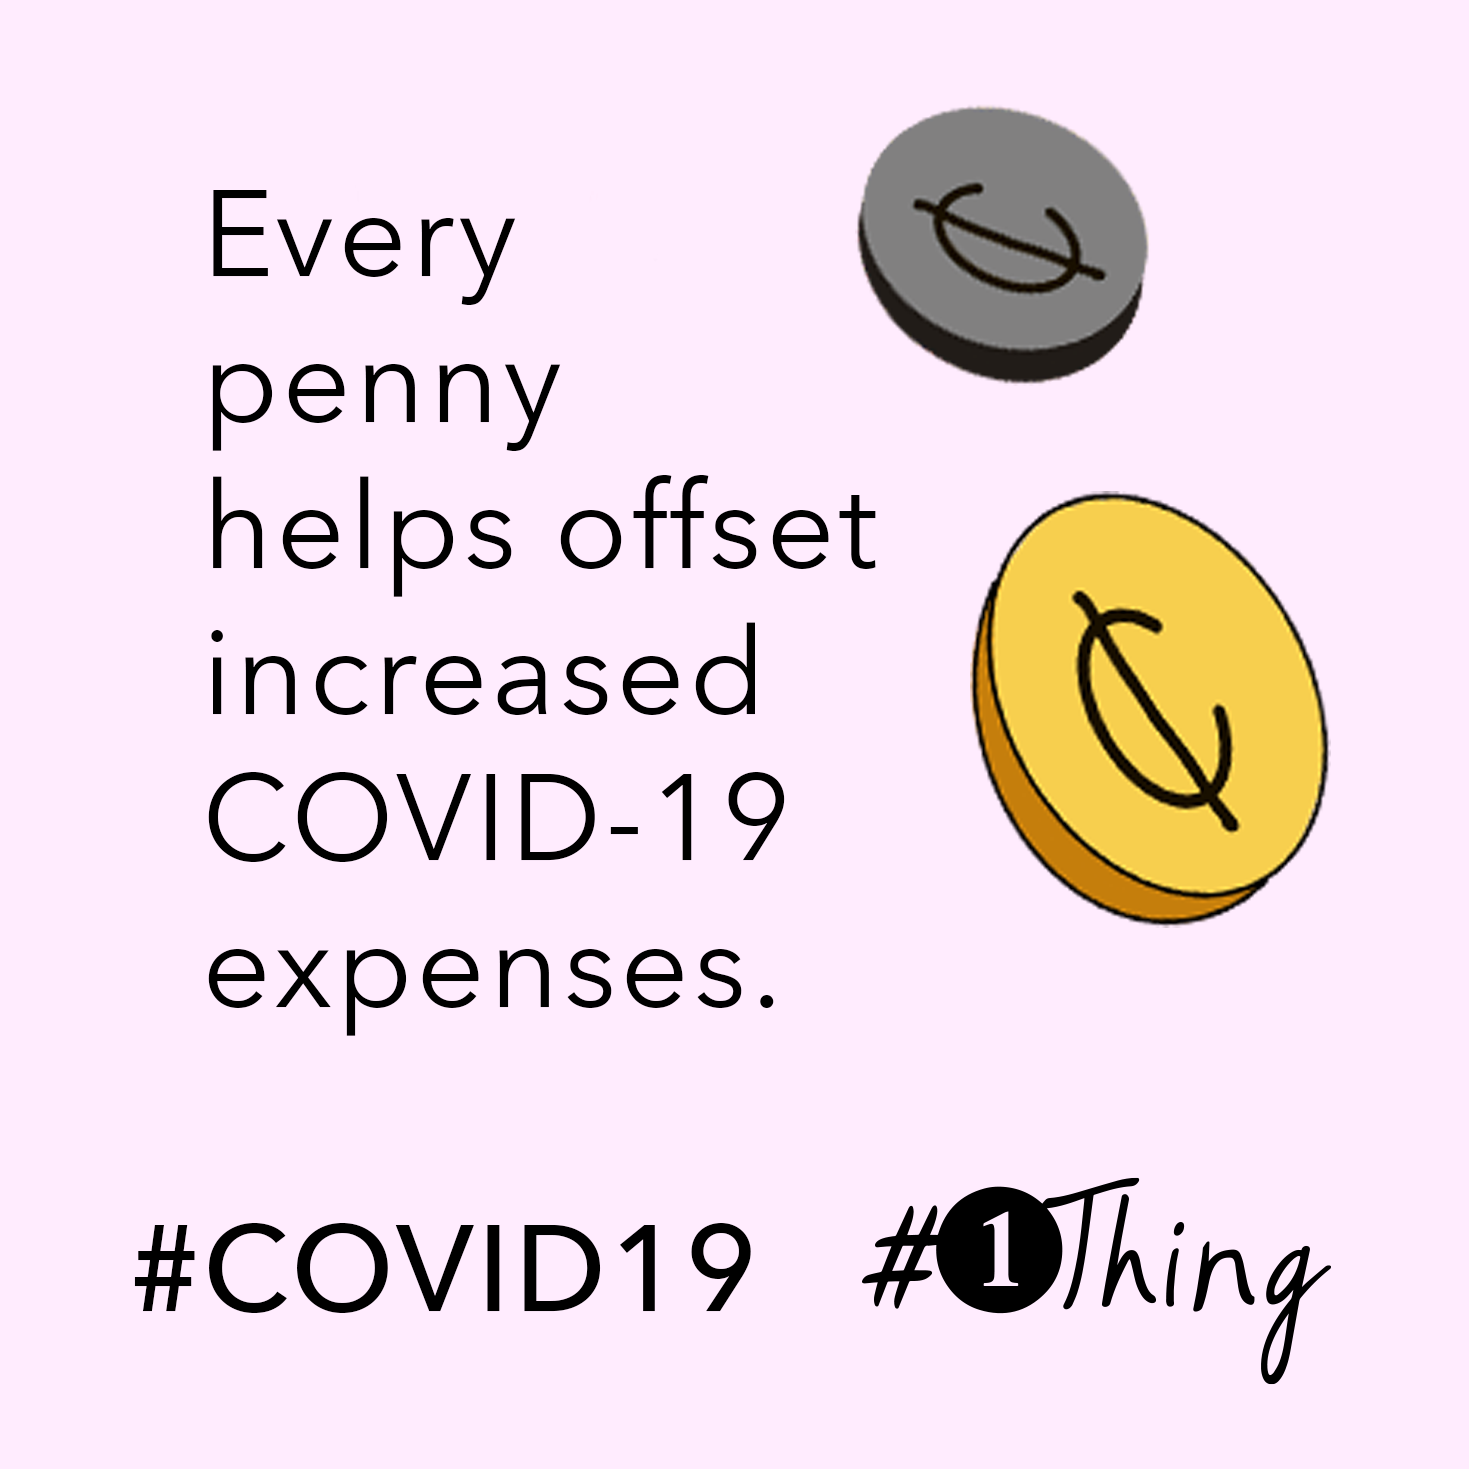 Every penny helps offset increased COVID-19 expenses.